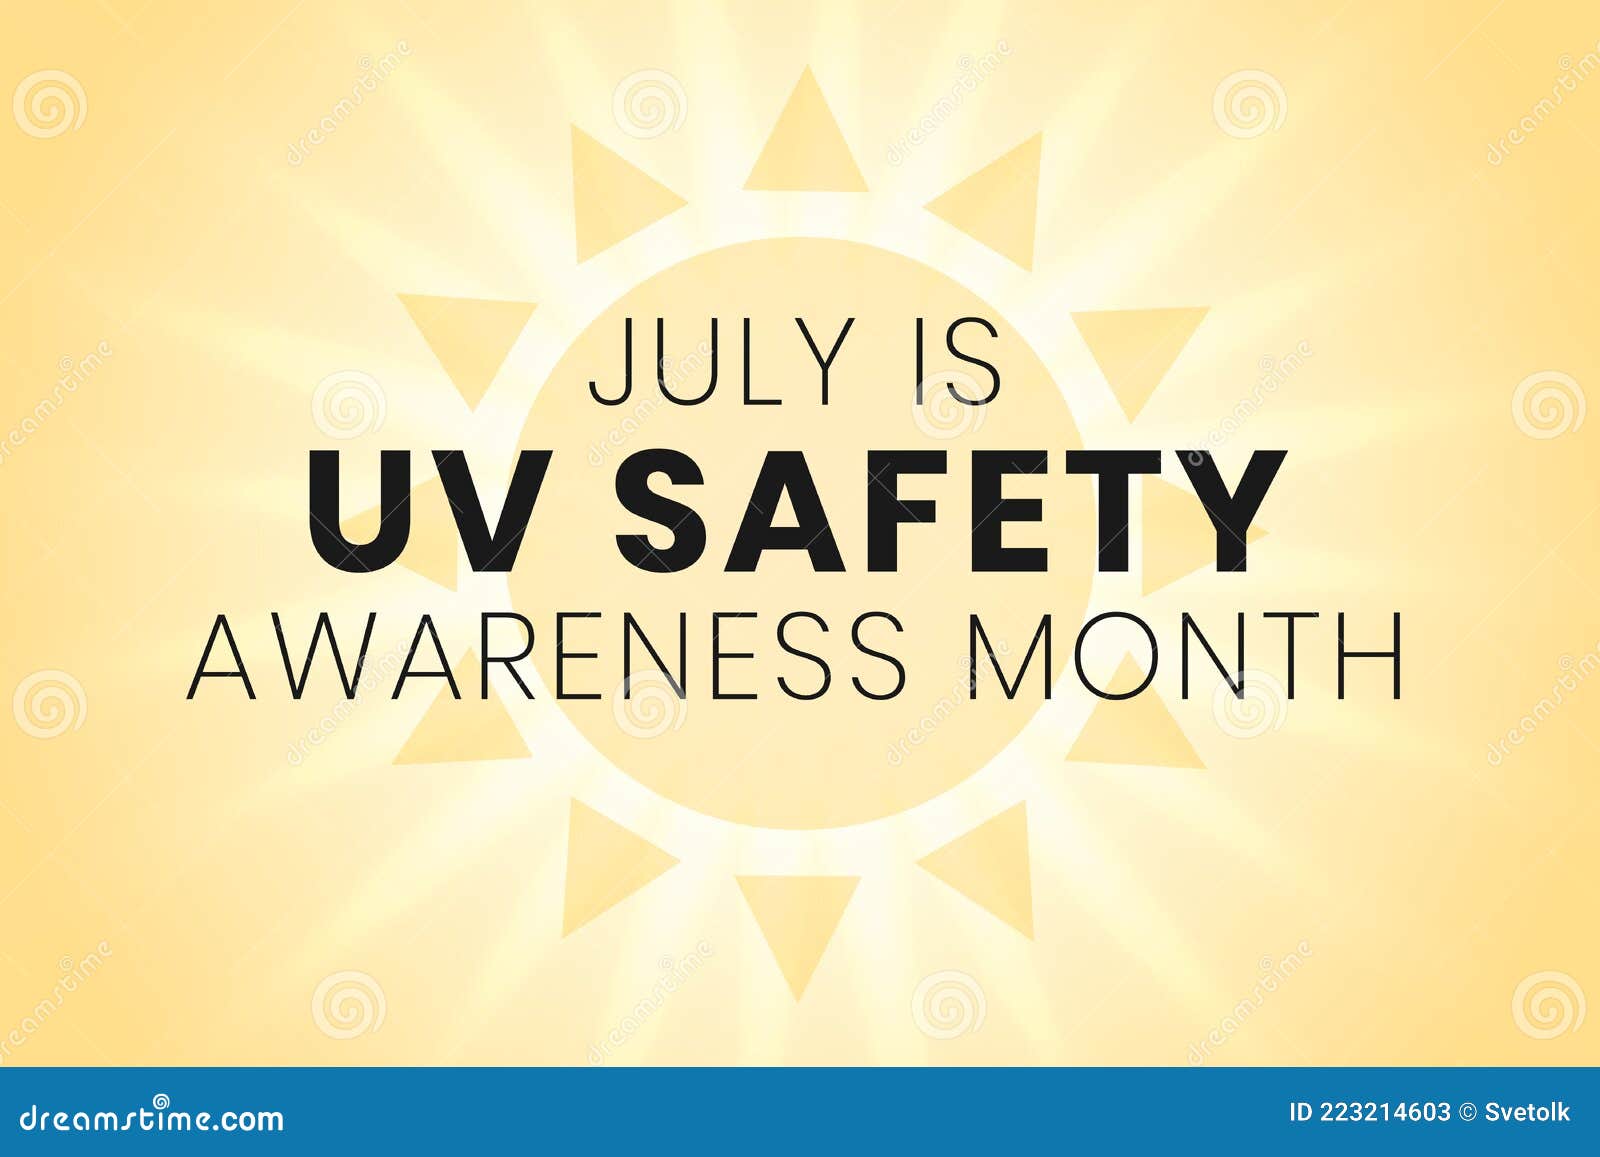 UV Safety Awareness Month. Annual Celebration In July. Concept Of ...